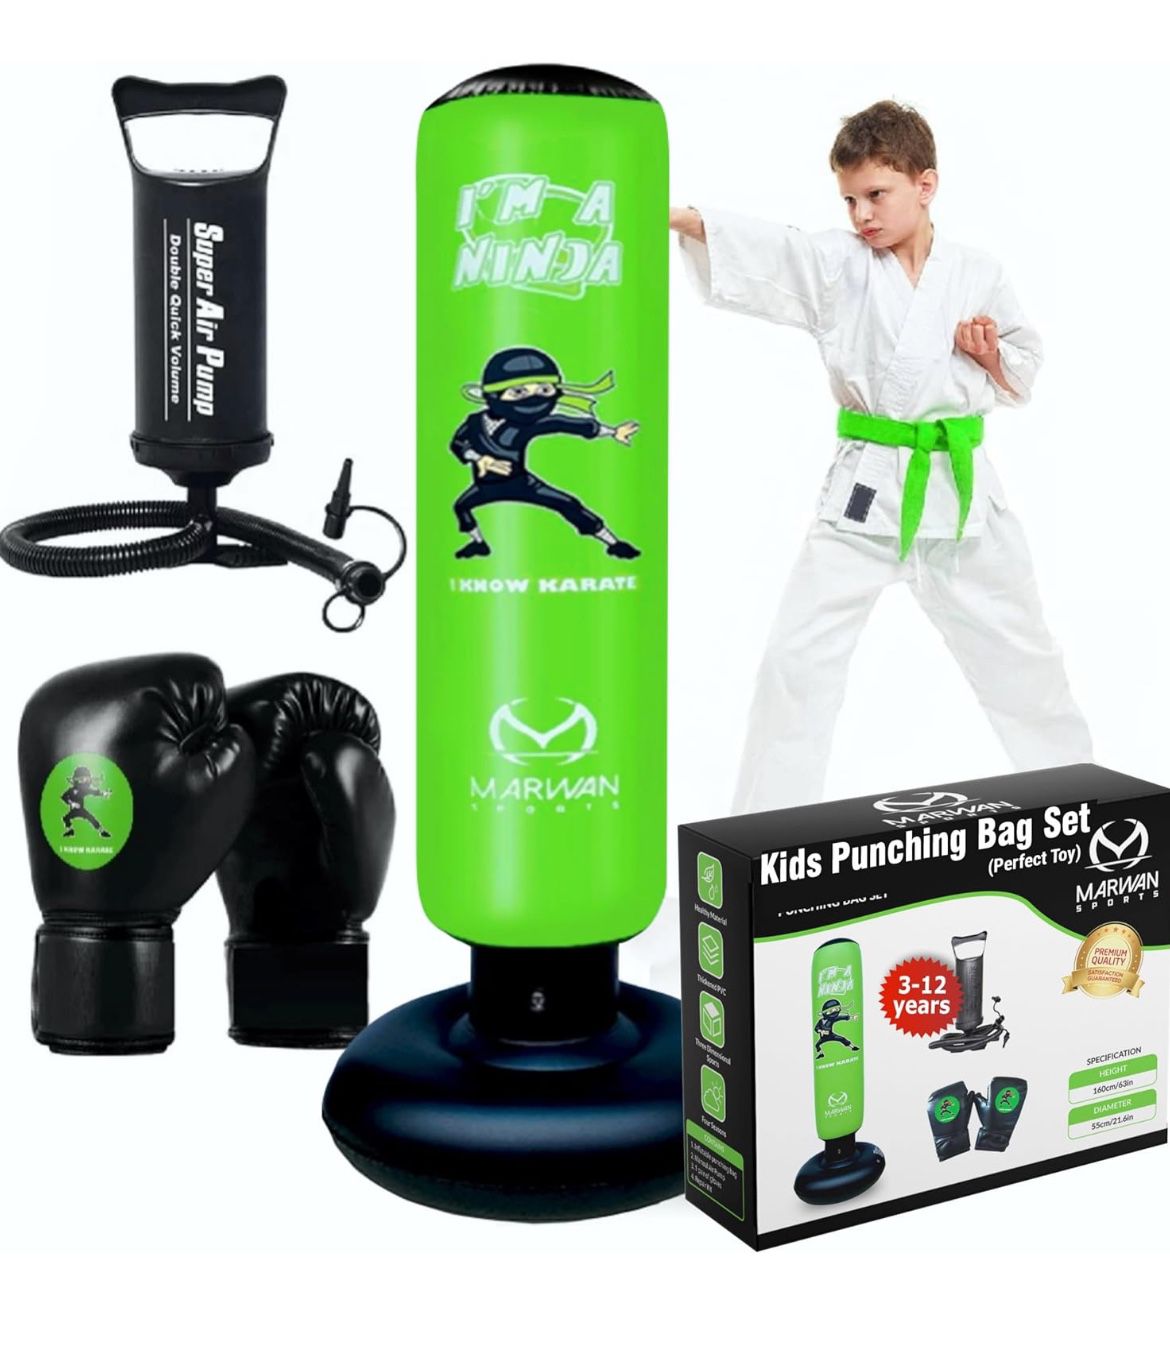 Marwan Sports Kids Punching Bag Toy Set, Inflatable Boxing Bag Toy for Boys Age 3-12